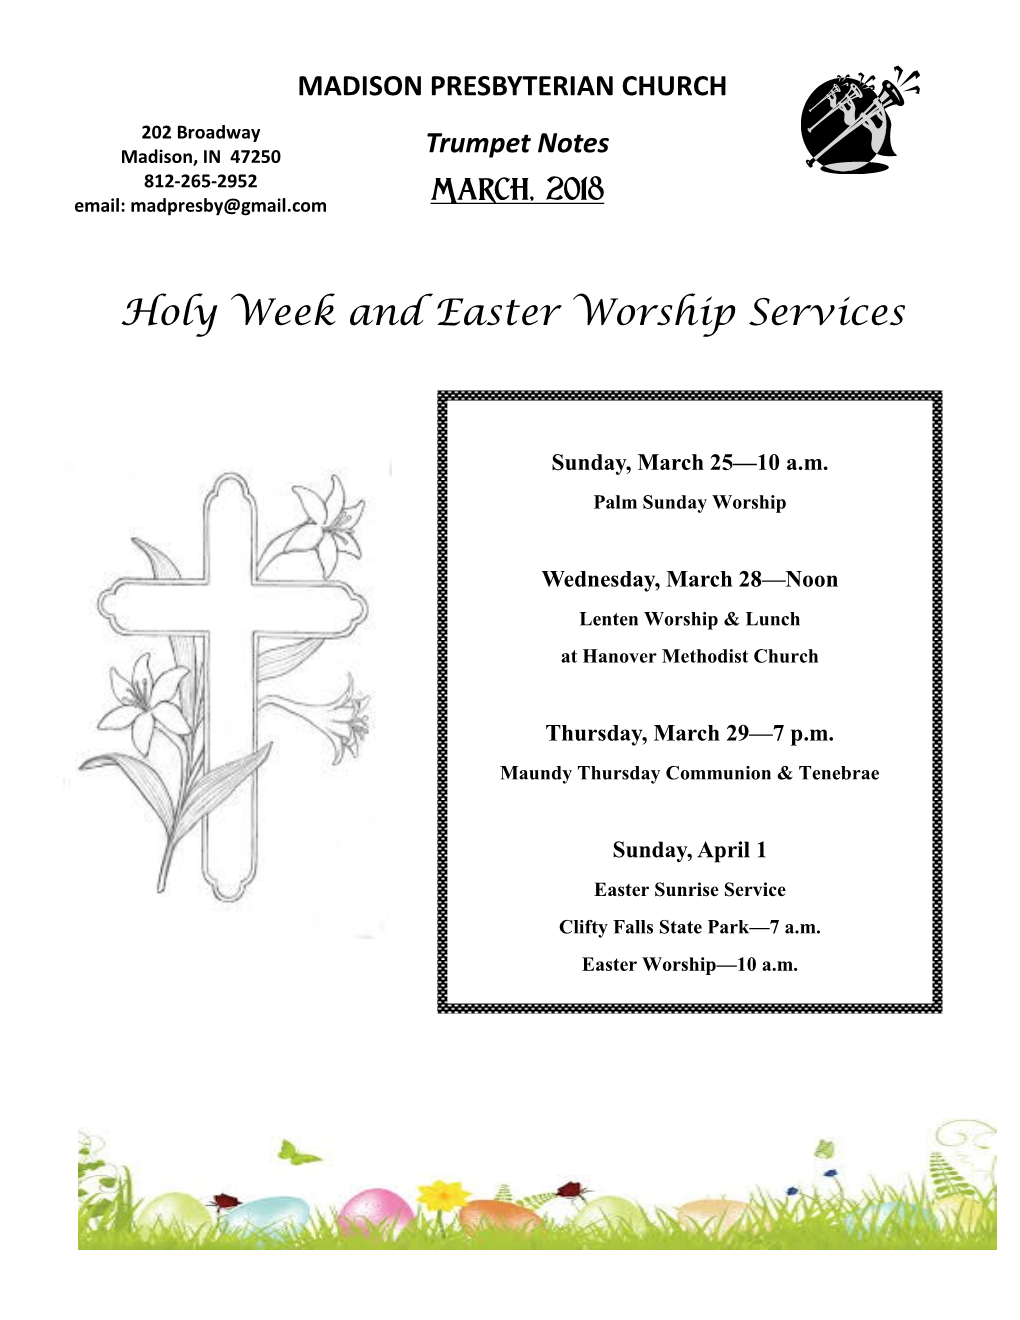 Holy Week and Easter Worship Services